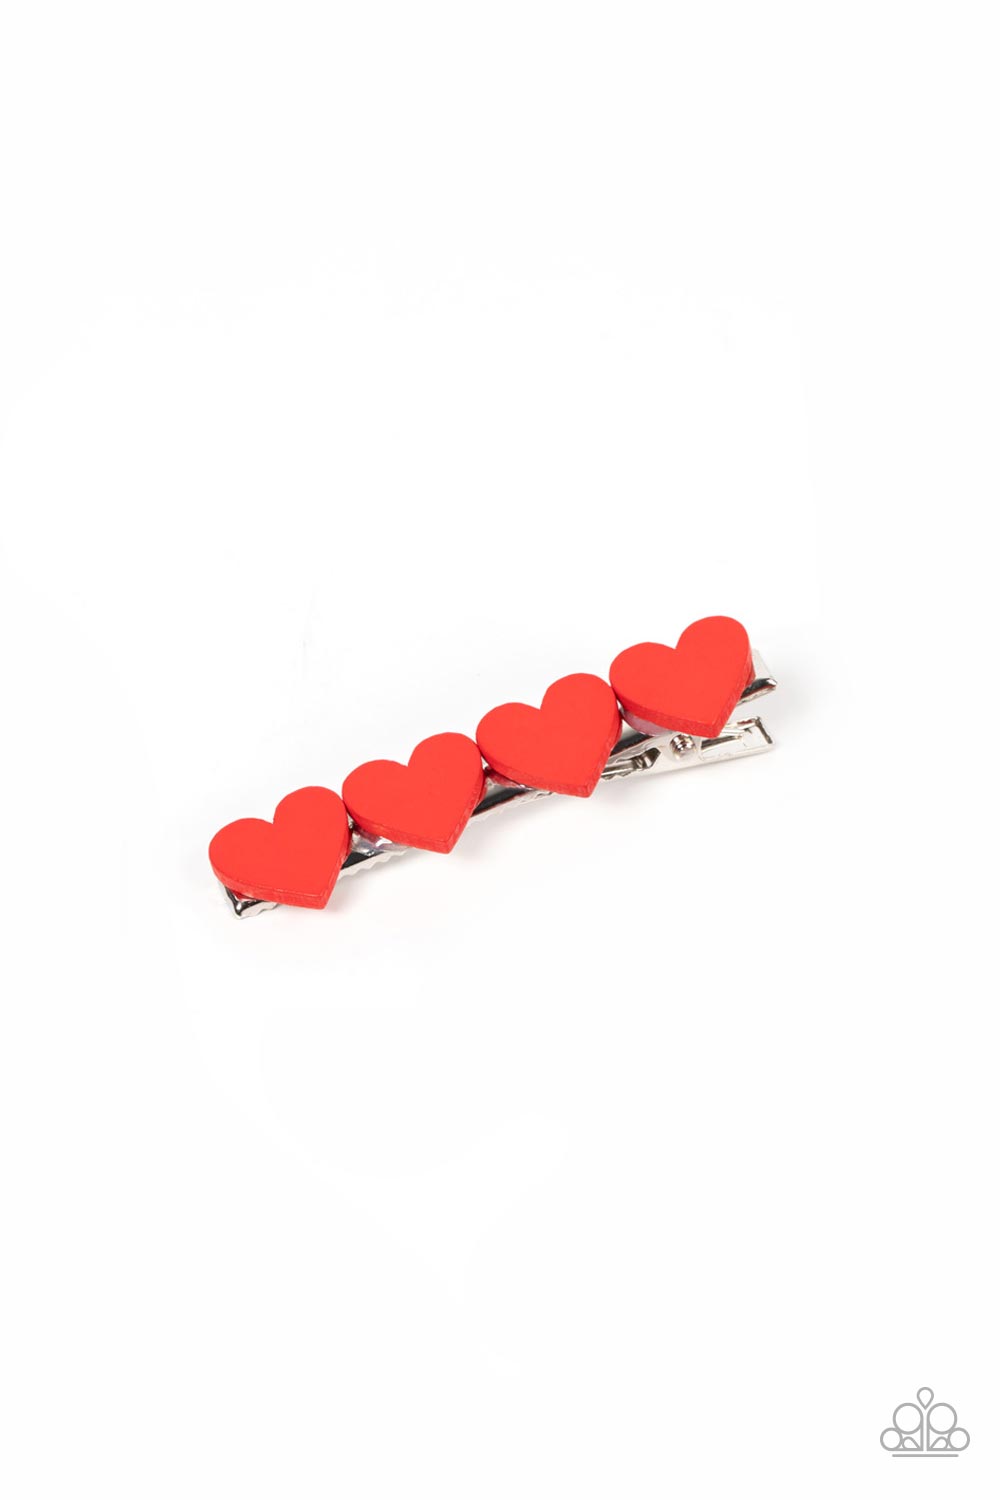 Sending You Love - Red Hair Clip - Paparazzi - Dare2bdazzlin N Jewelry